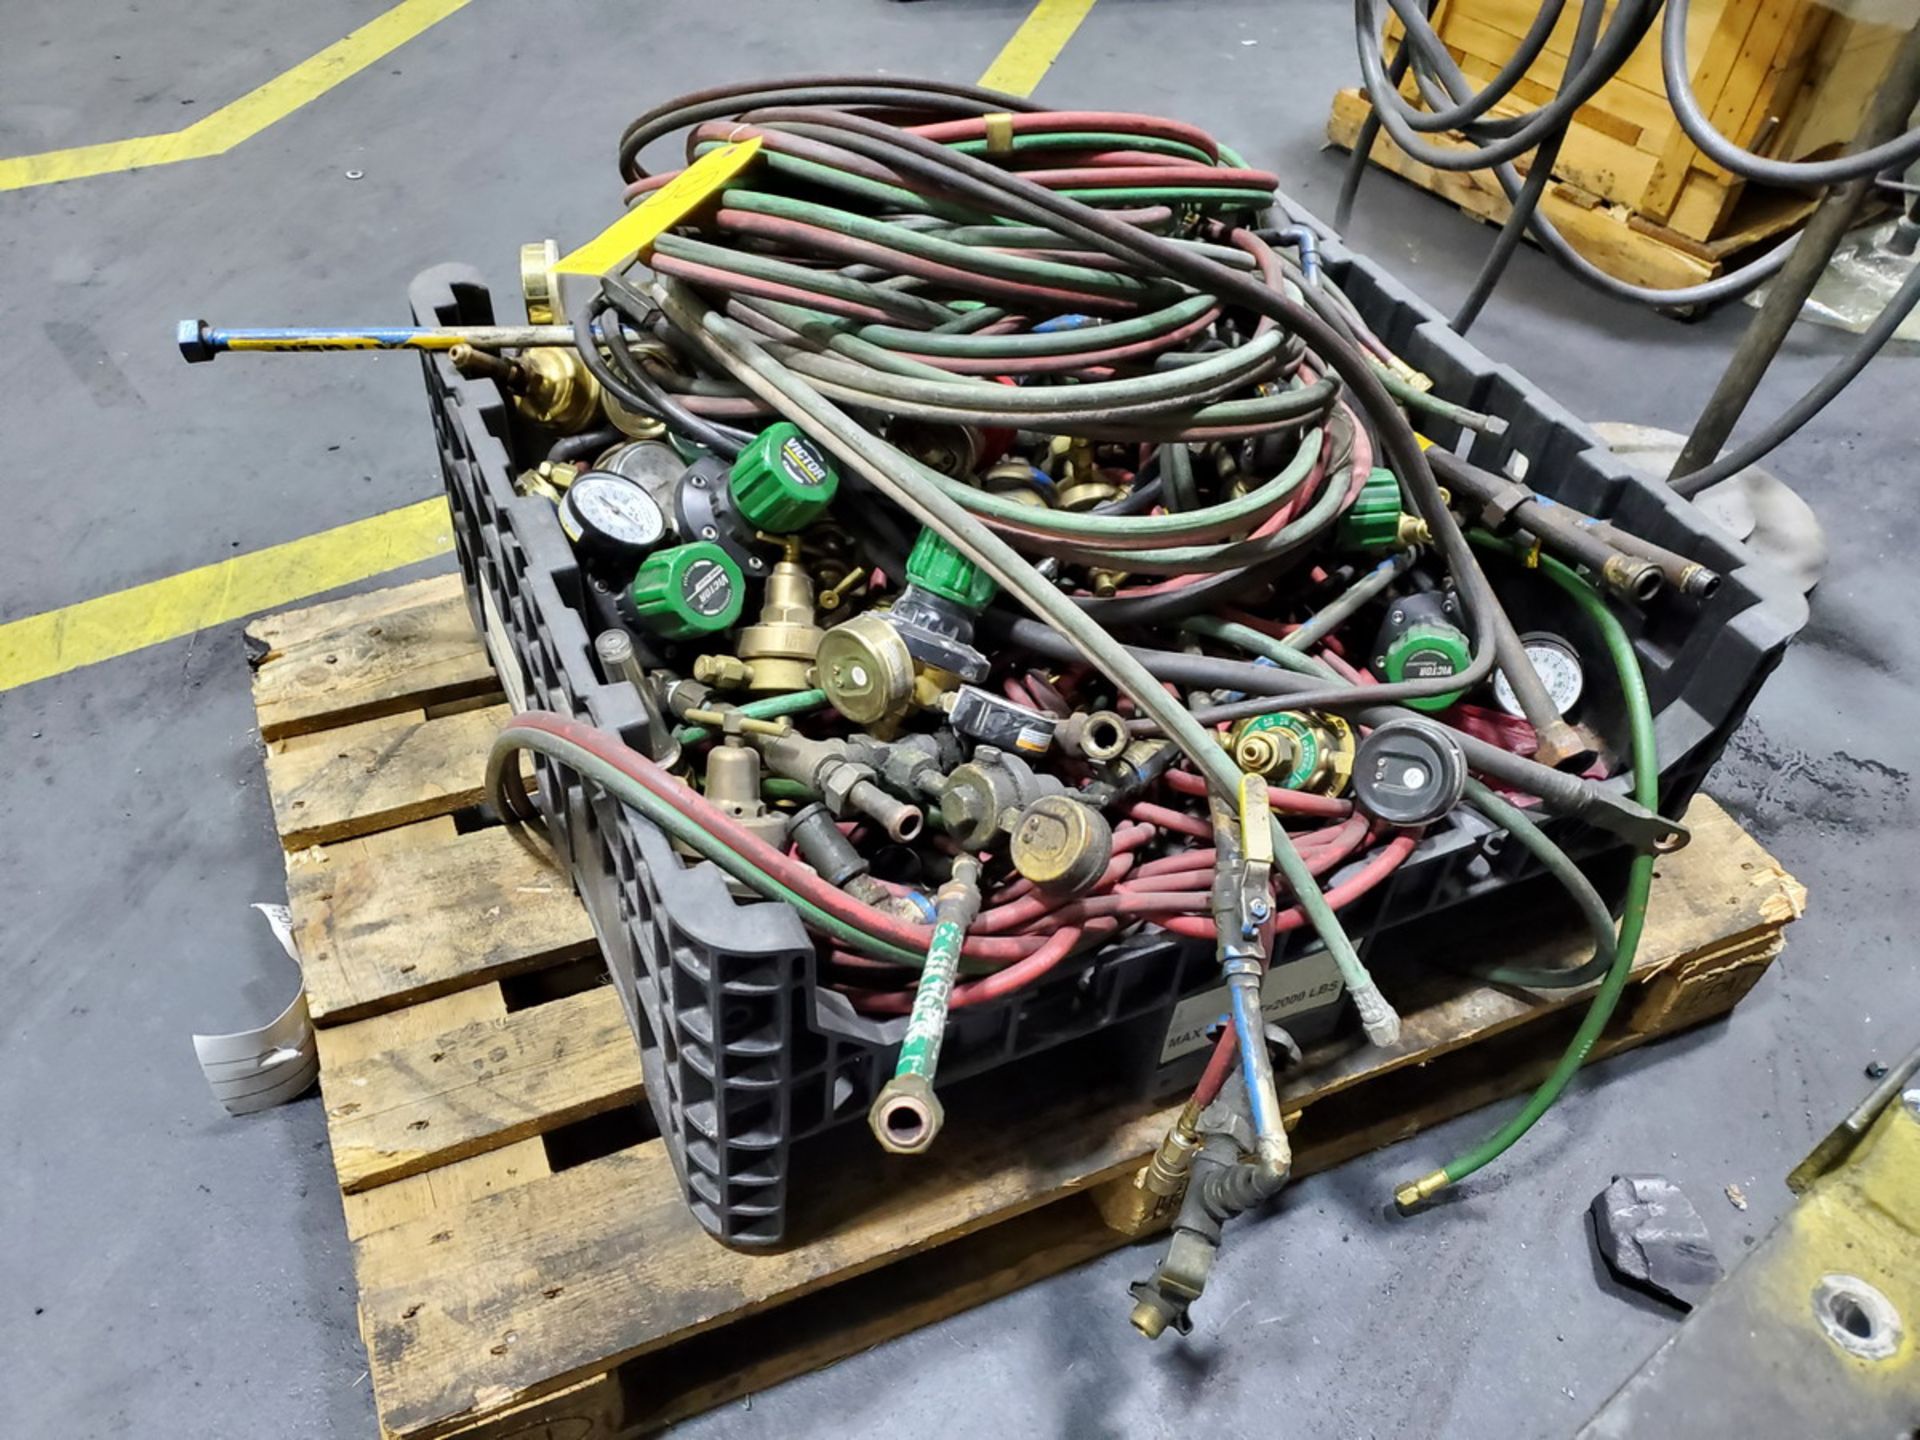 Welding Contents To Include But Not Limited To: Regulators, Leads, Hoses, etc. - Image 9 of 9